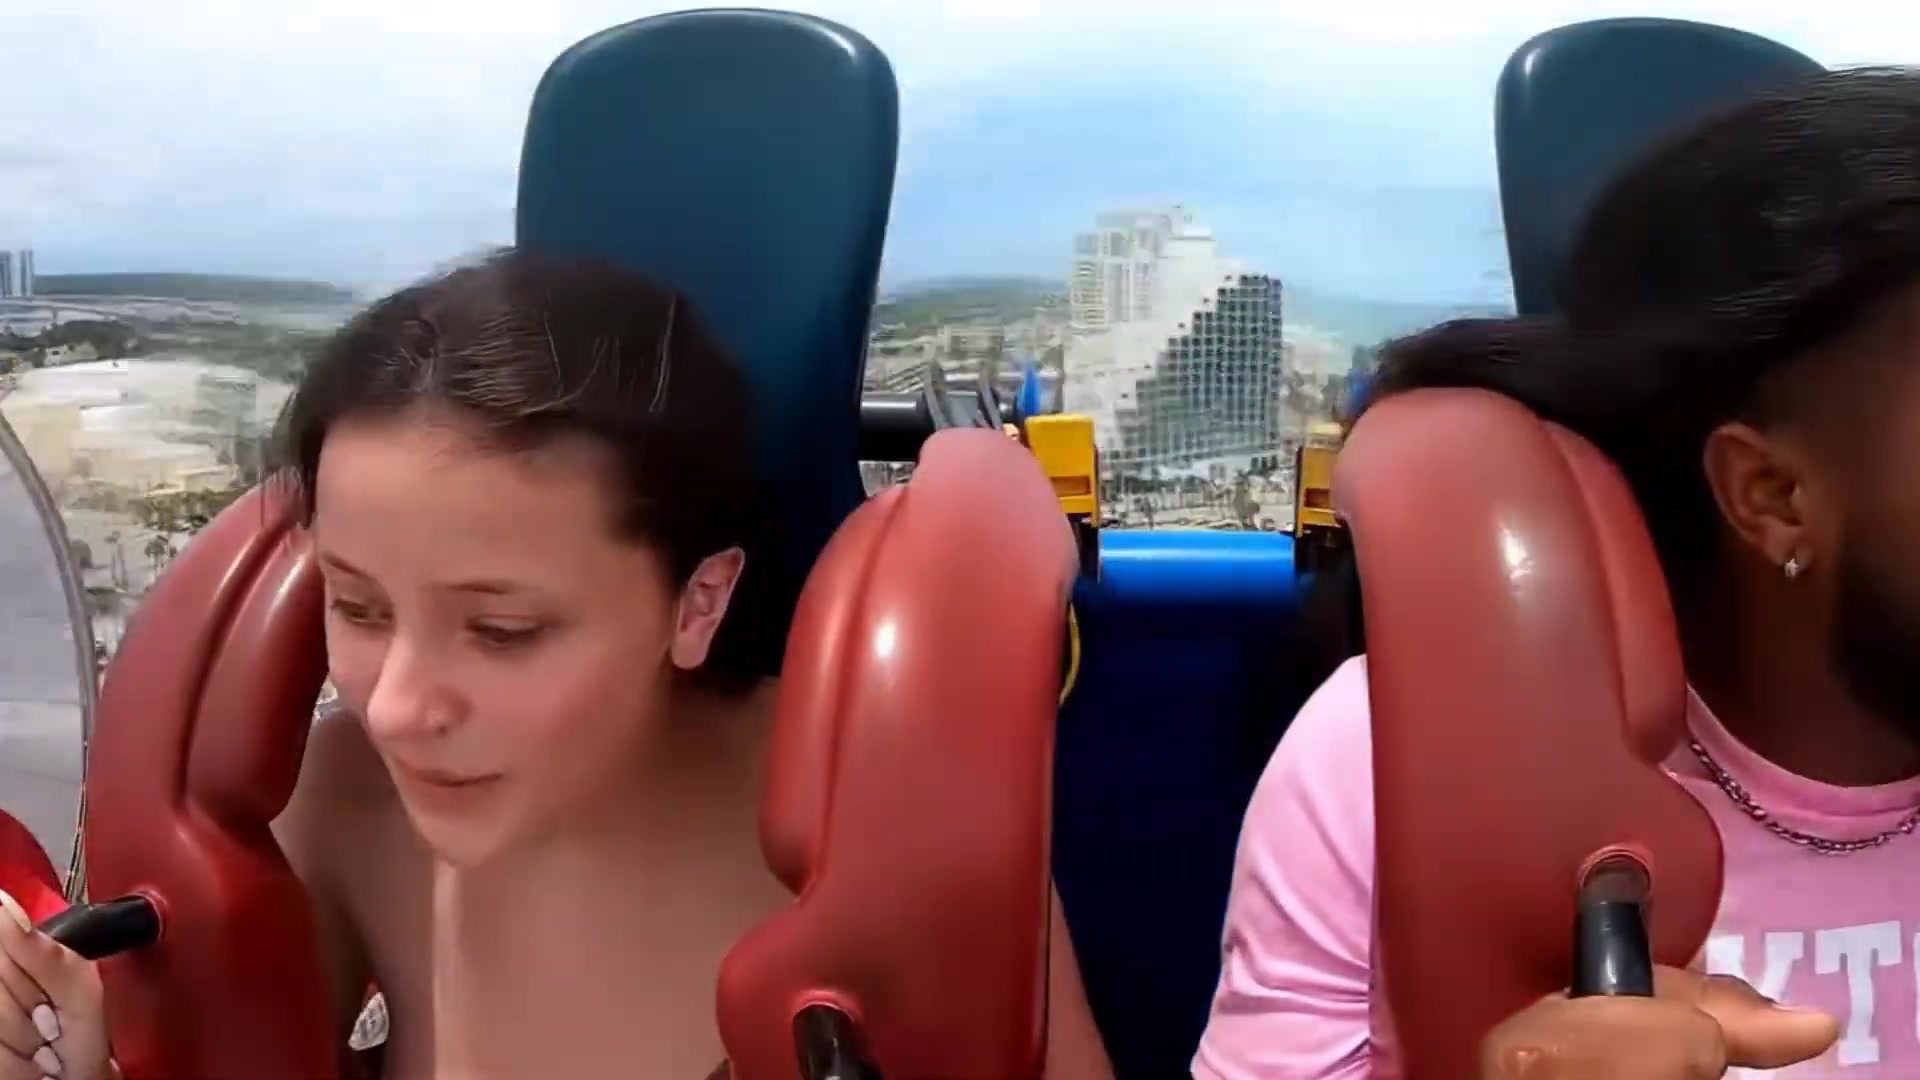 Hold on tight! nip slips on the sling shot ride